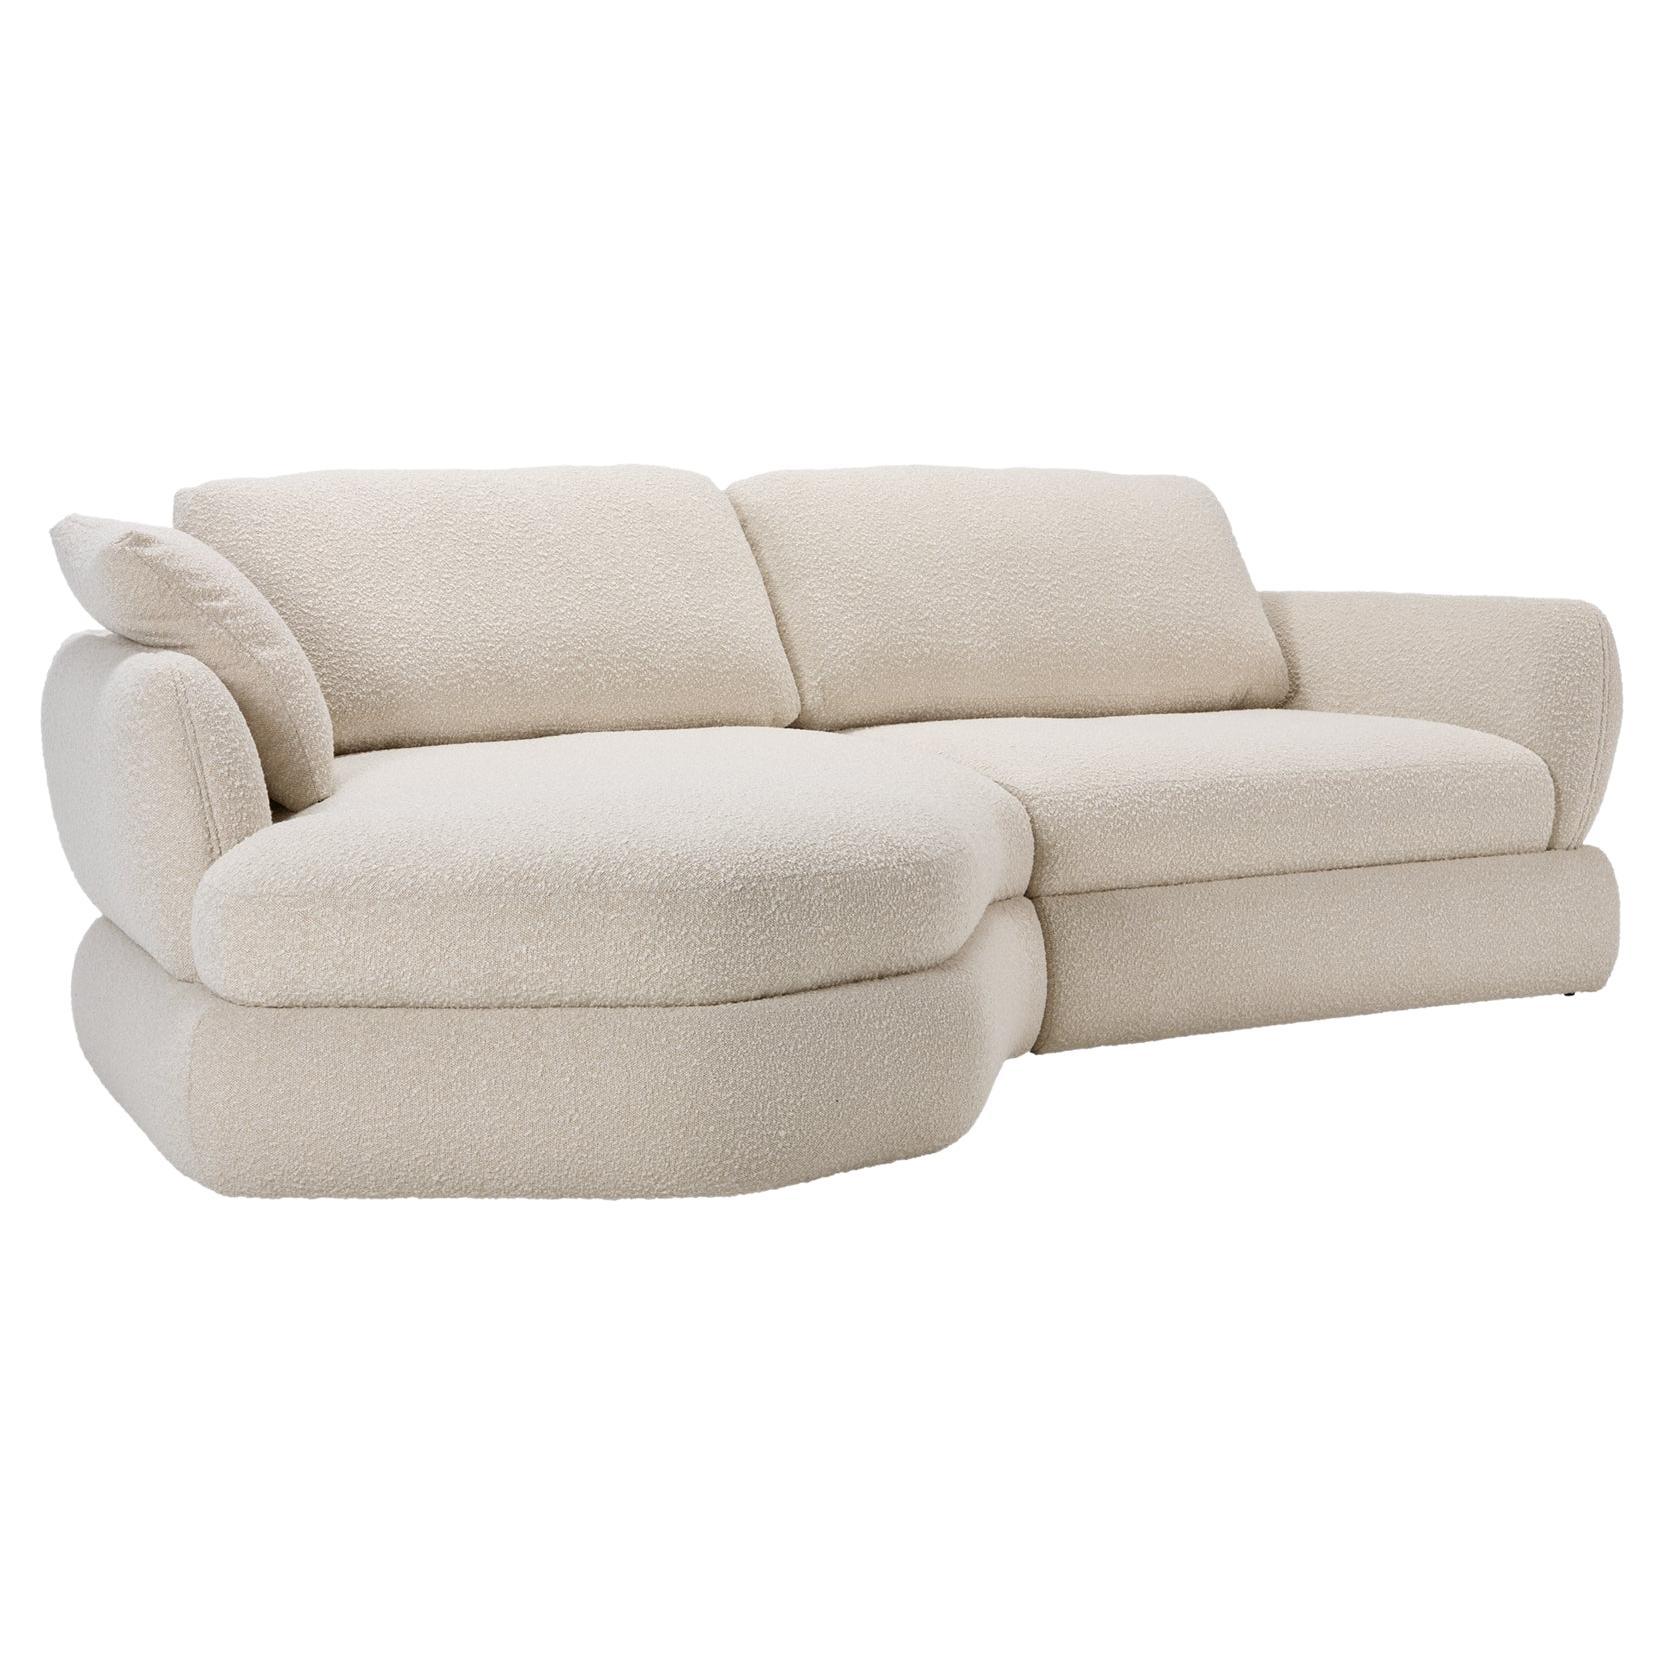 BELLAGIO Chaise-Longue sofa in white boucle For Sale